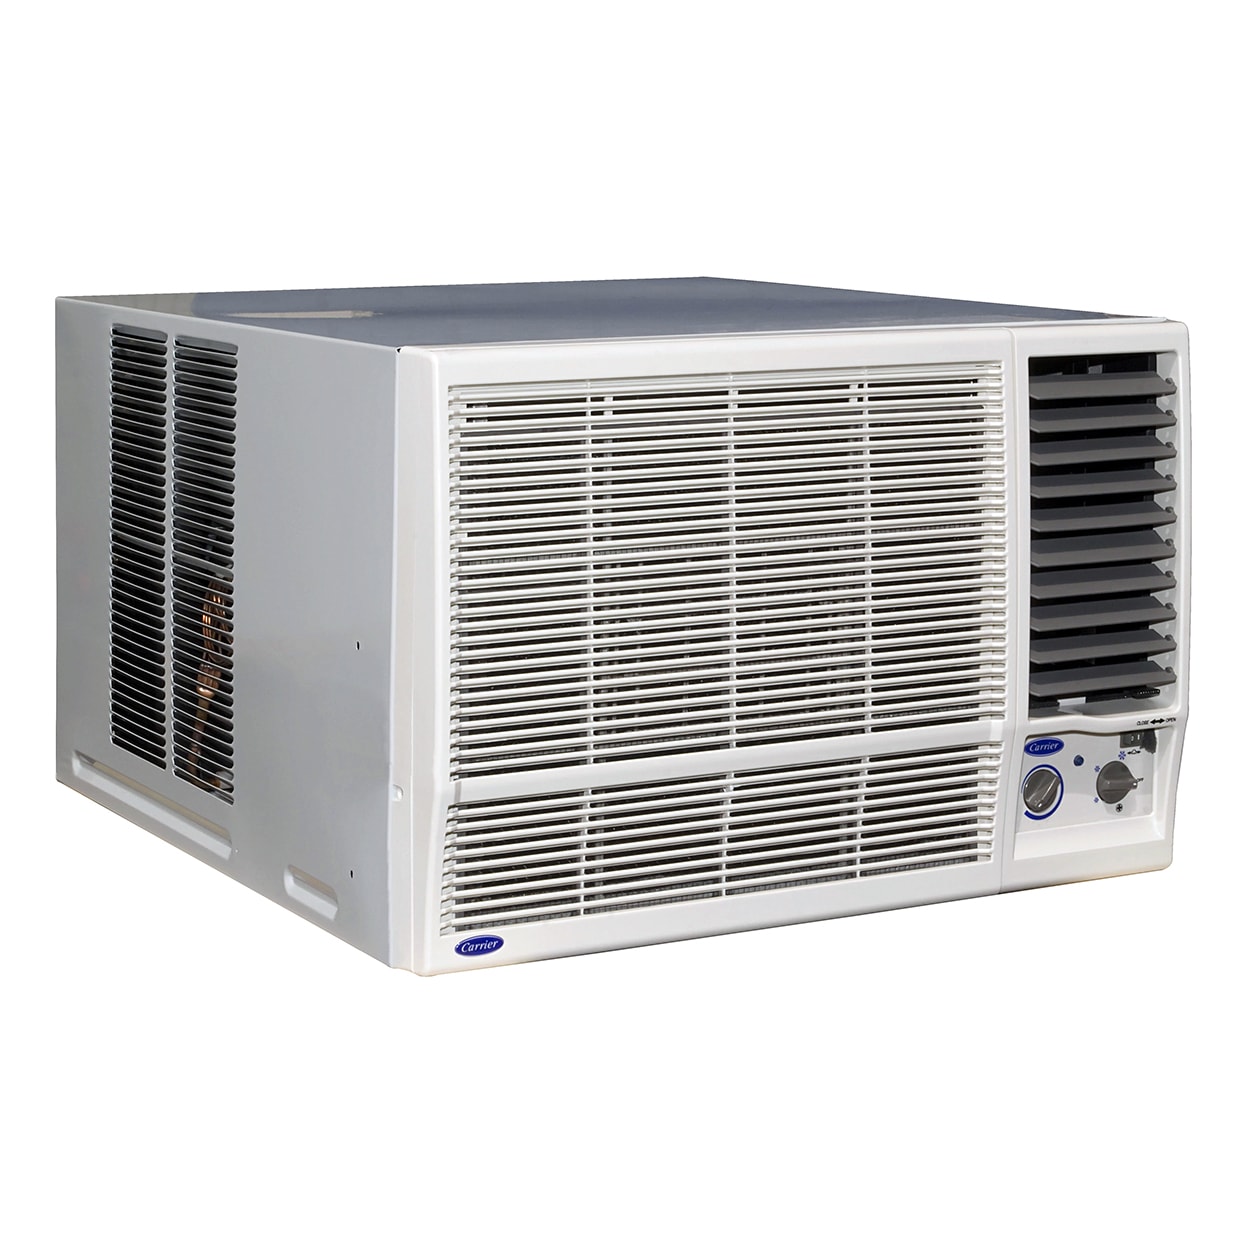 Residential HVAC Products Carrier Saudi Arabia air conditioning, heating and refrigeration